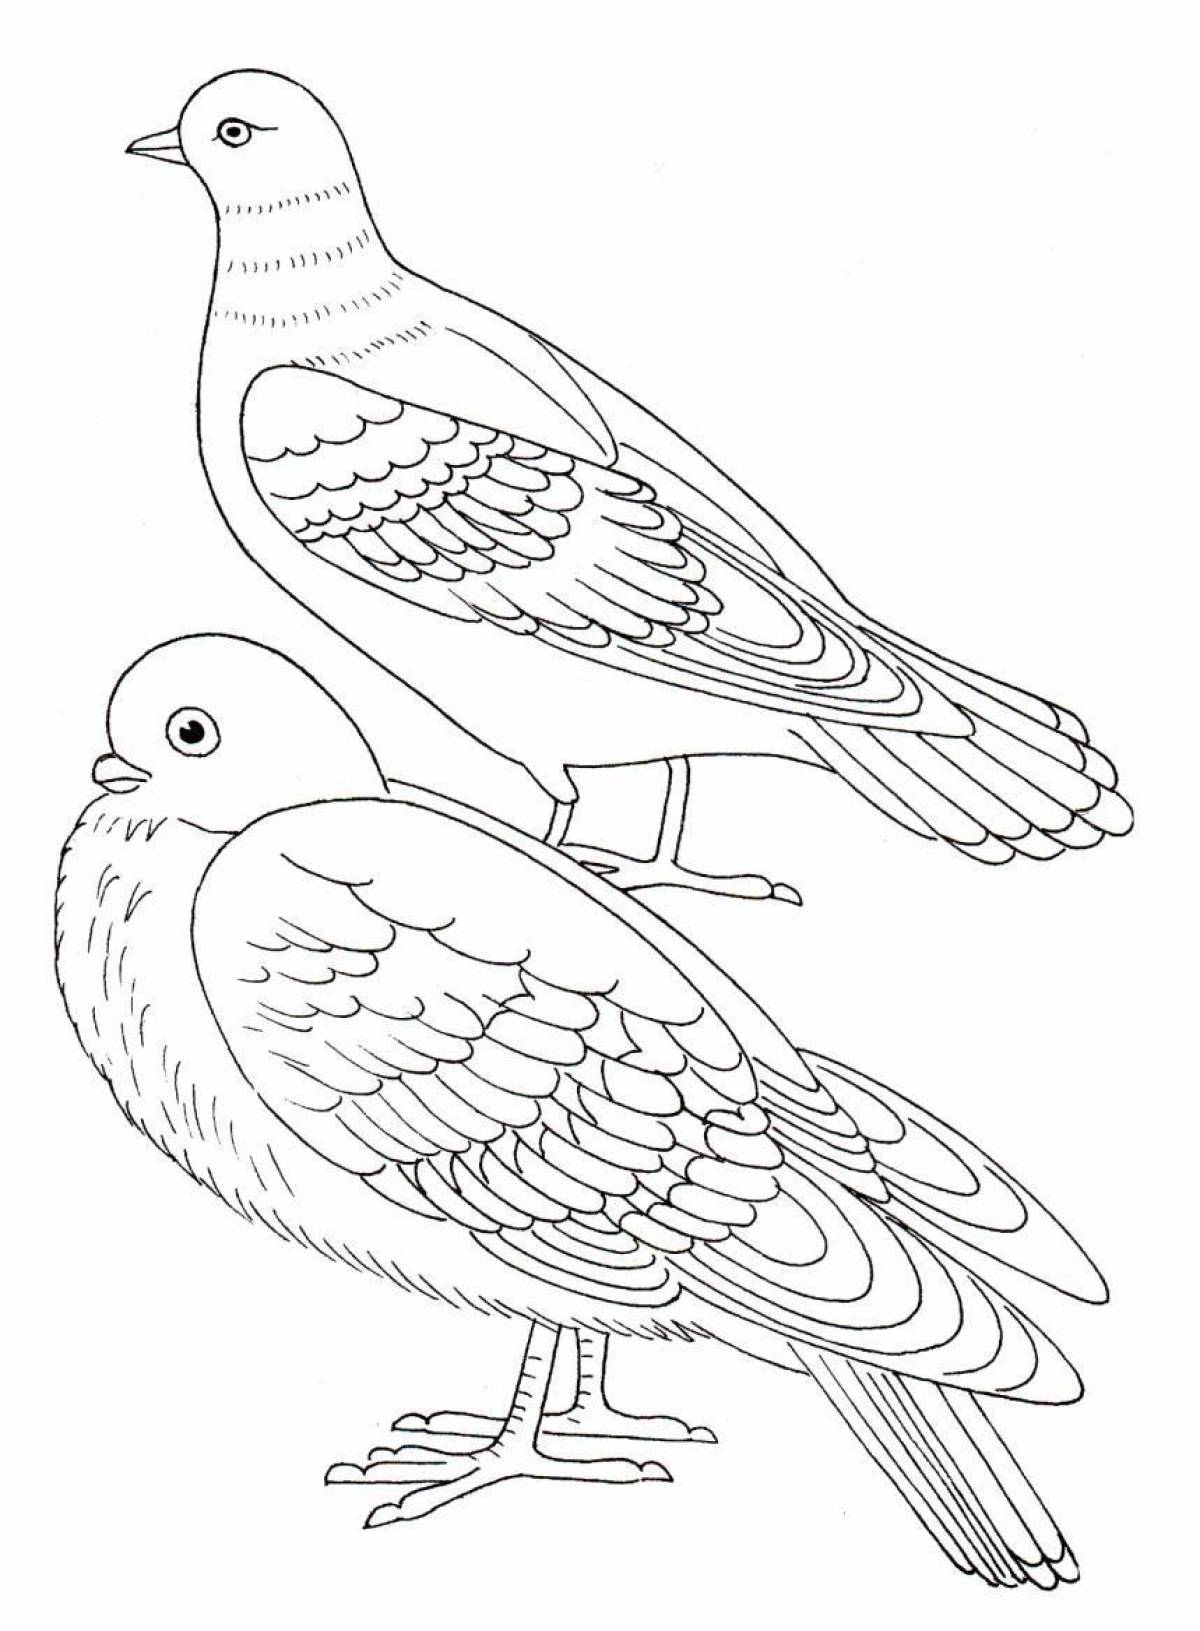 Glamorous dove coloring page for kids